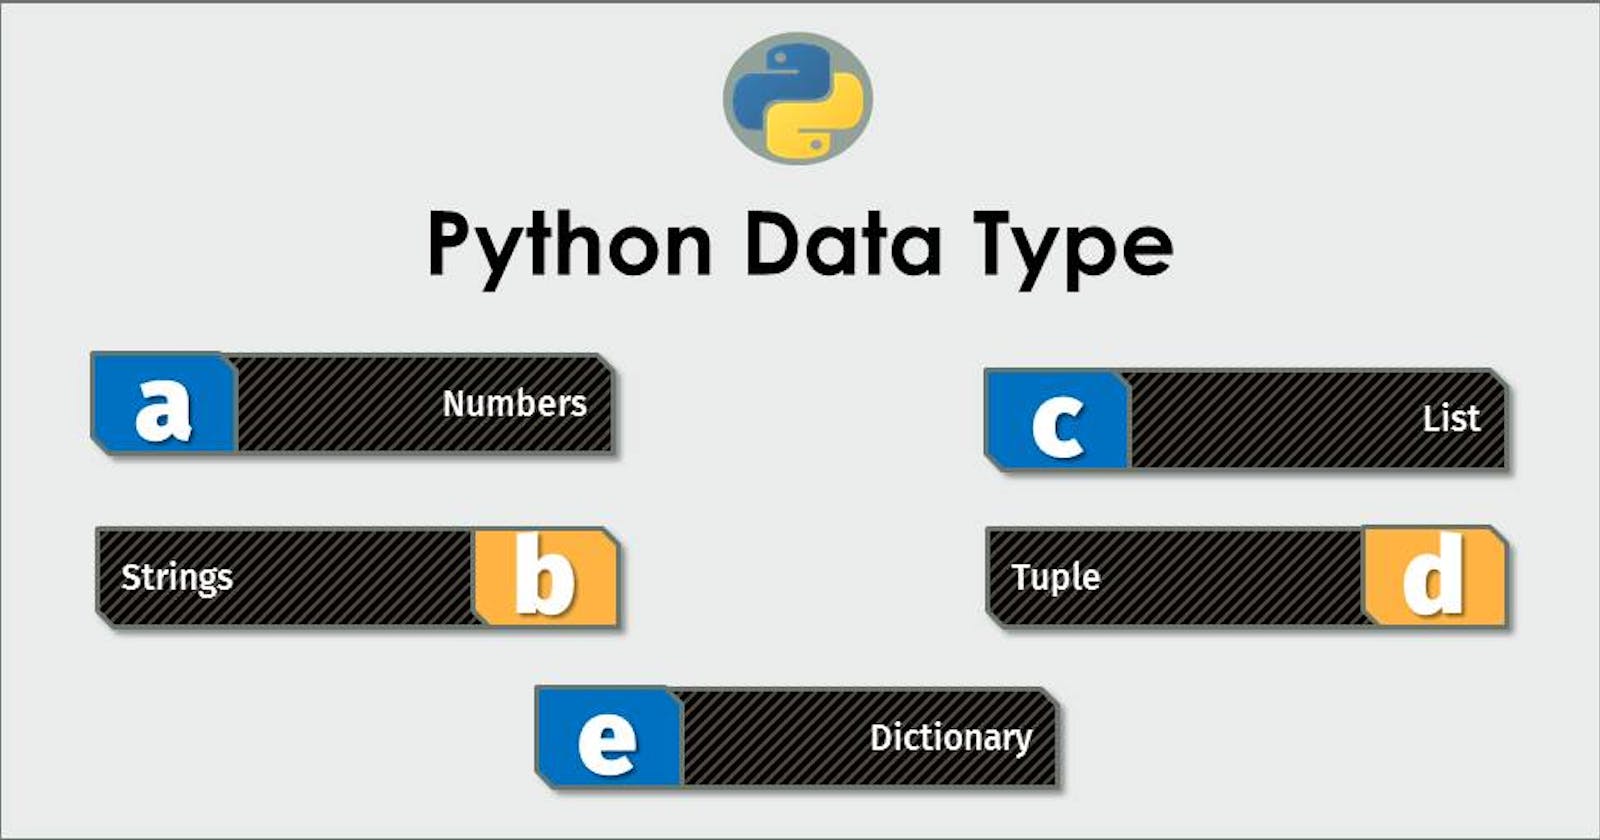 Types and values in Python